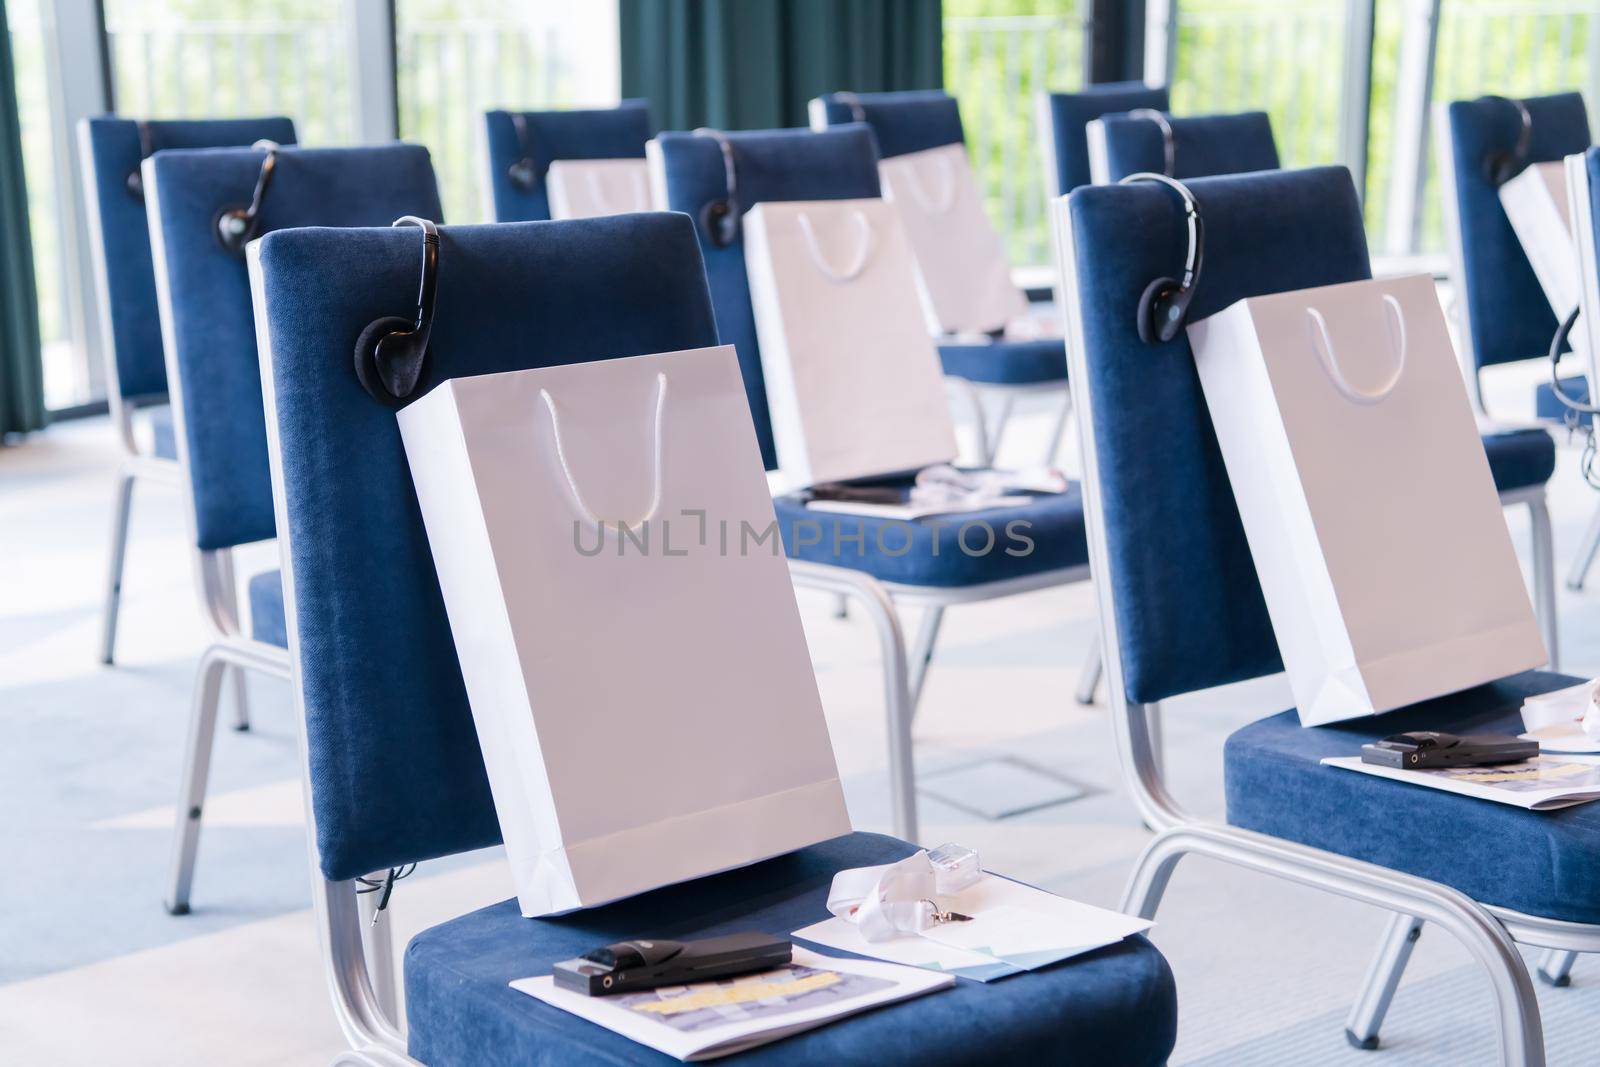 modern conference room interior before starting a business seminar by dotshock